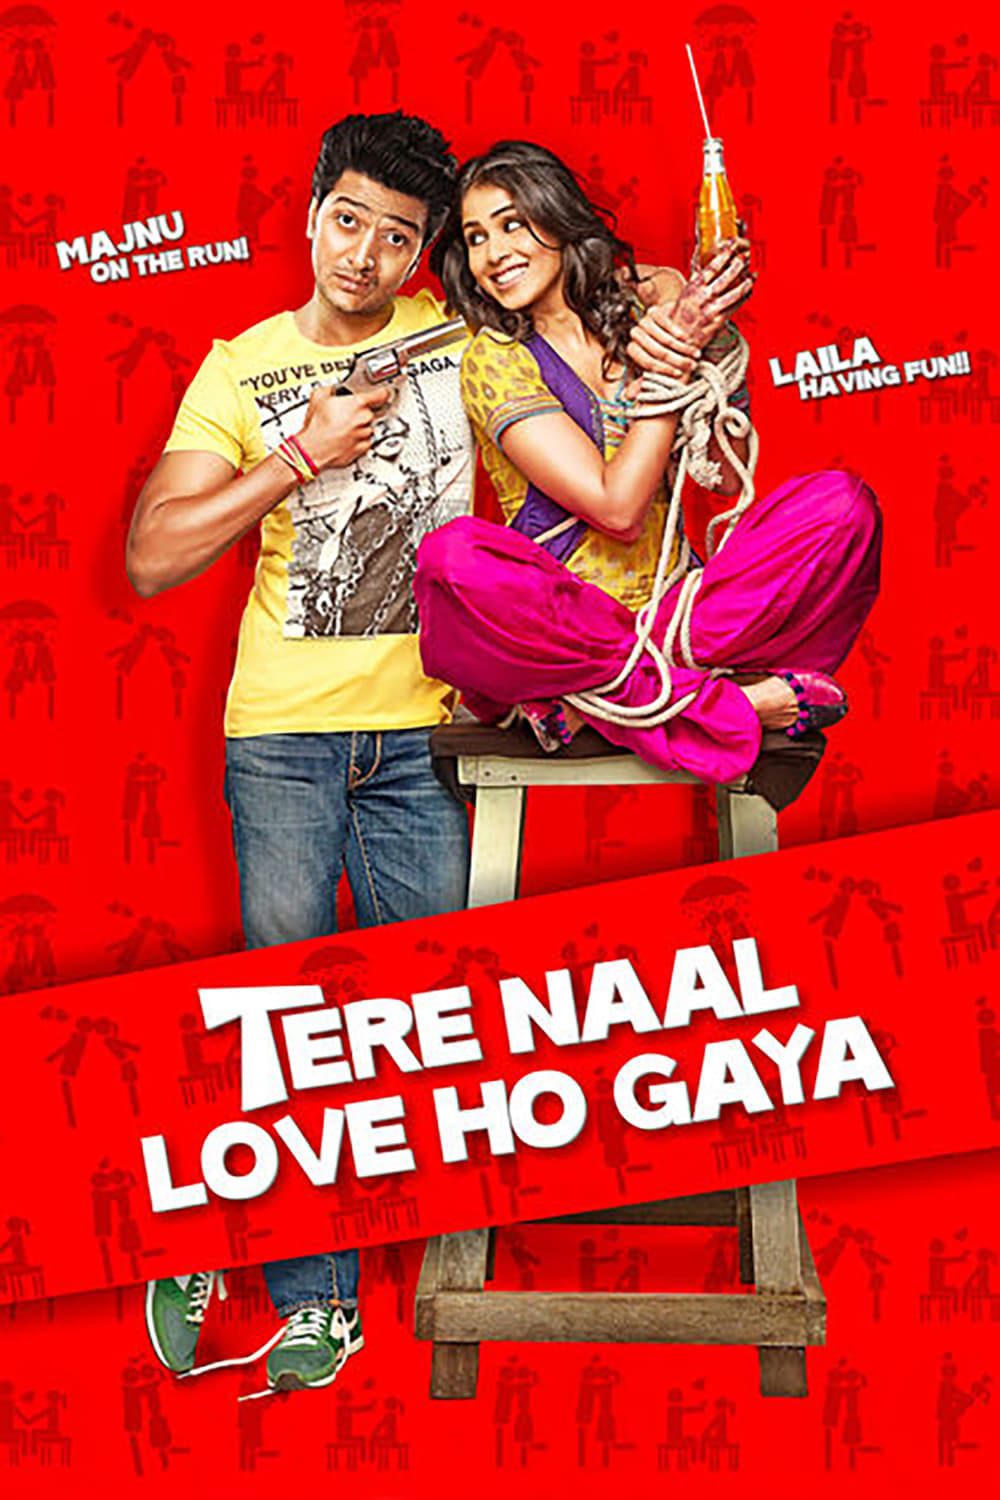 Poster for the movie "Tere Naal Love Ho Gaya"